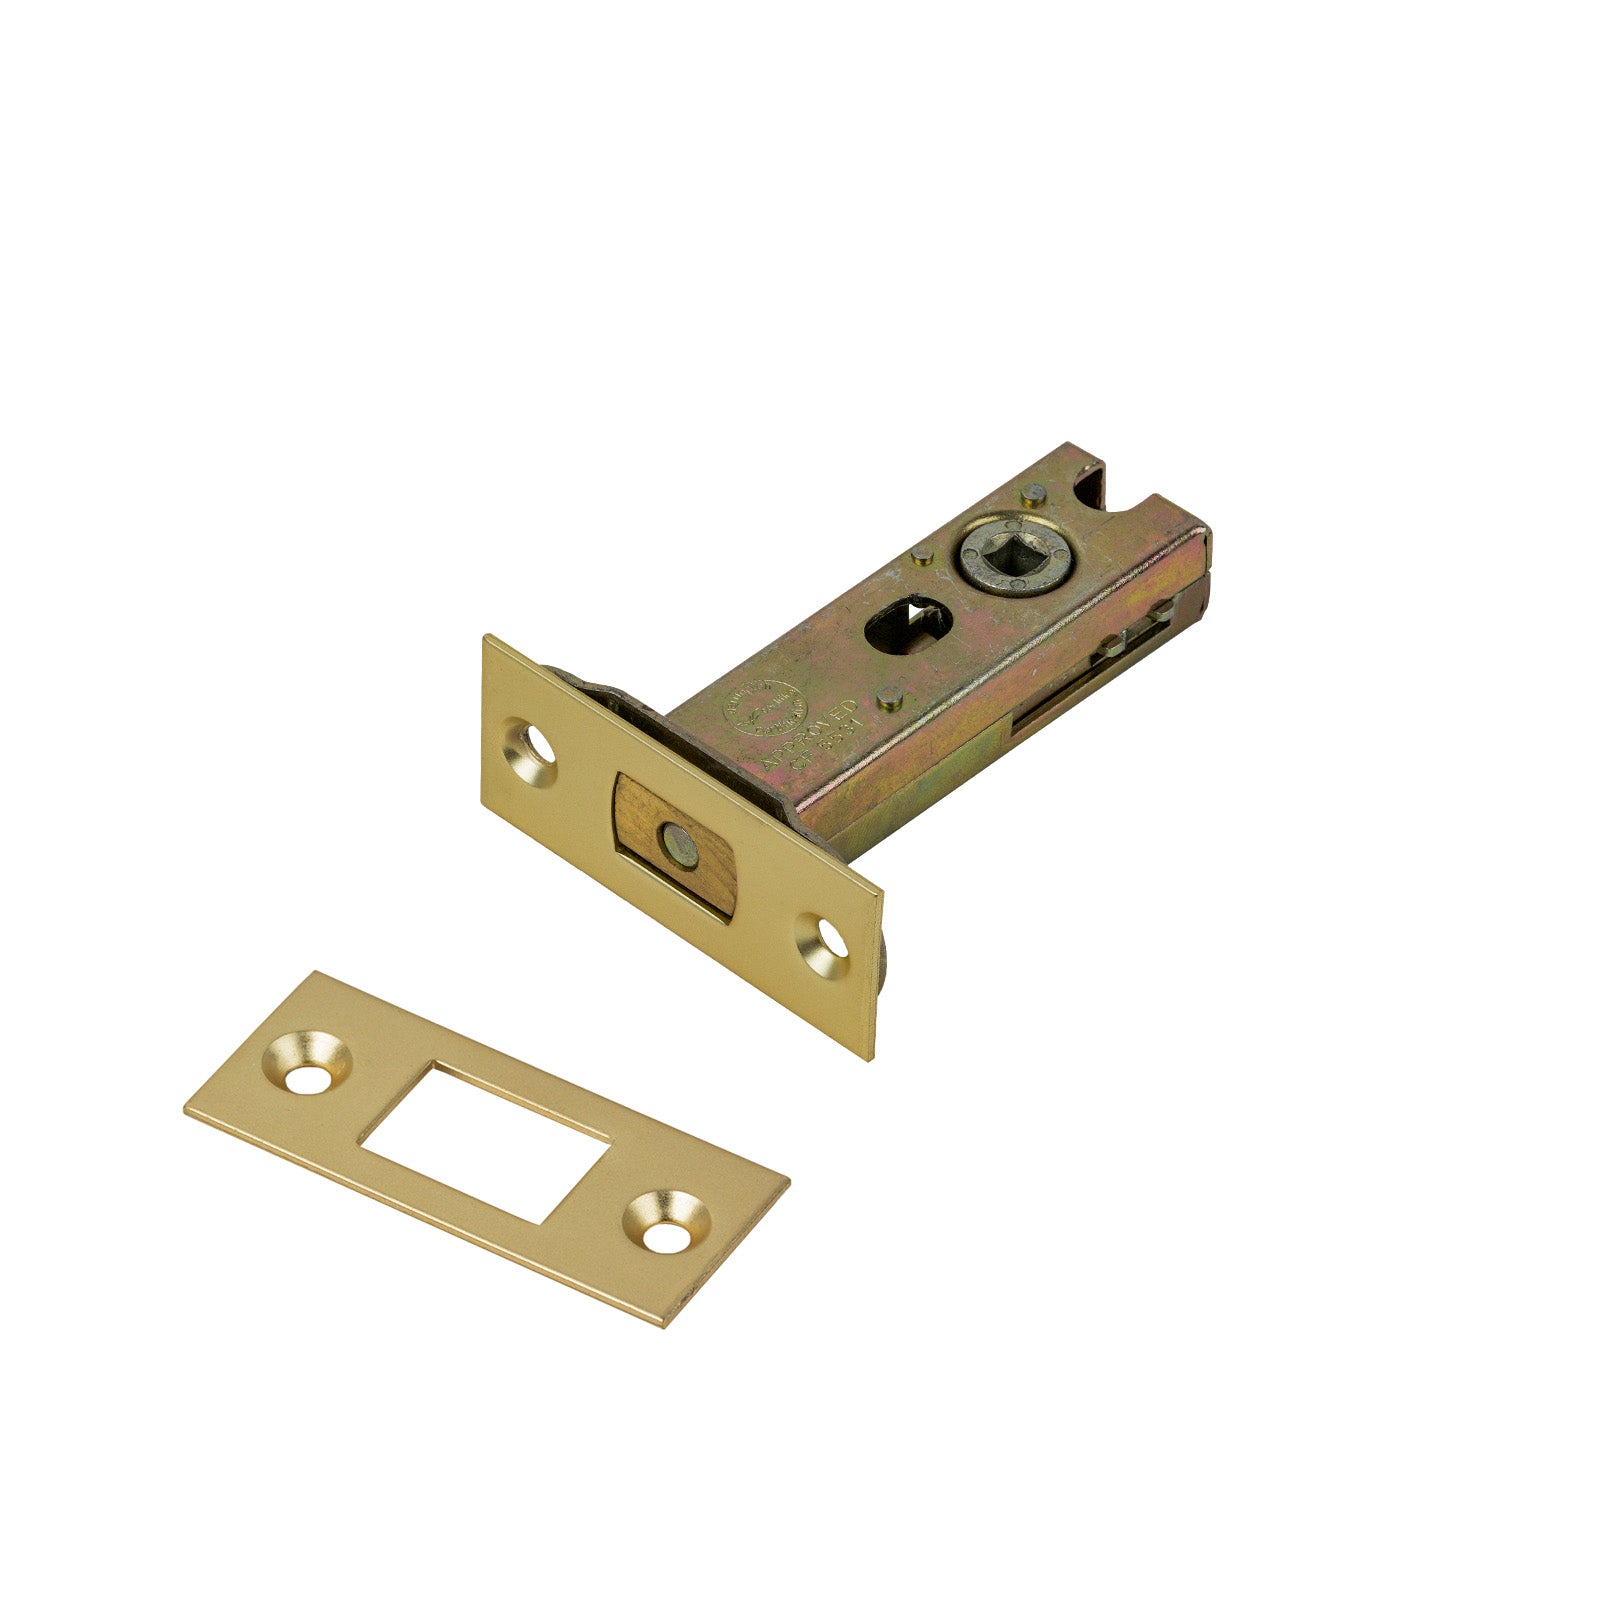 SHOW Bathroom Deadbolt - 3 Inch with Satin Brass finished forend and striker plate